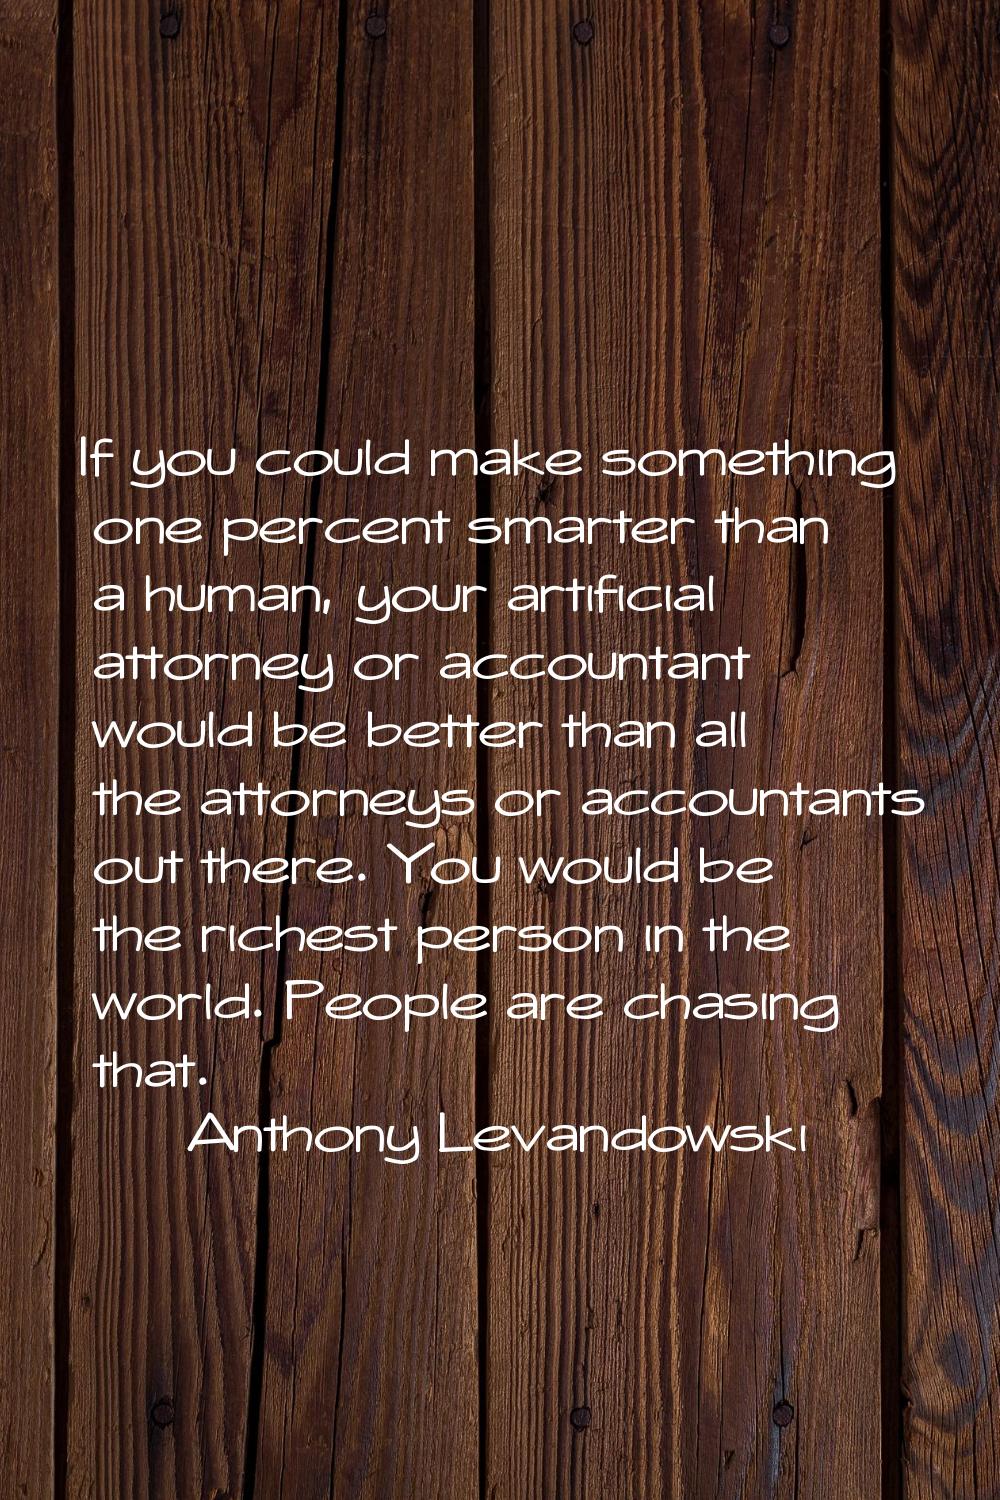 If you could make something one percent smarter than a human, your artificial attorney or accountan